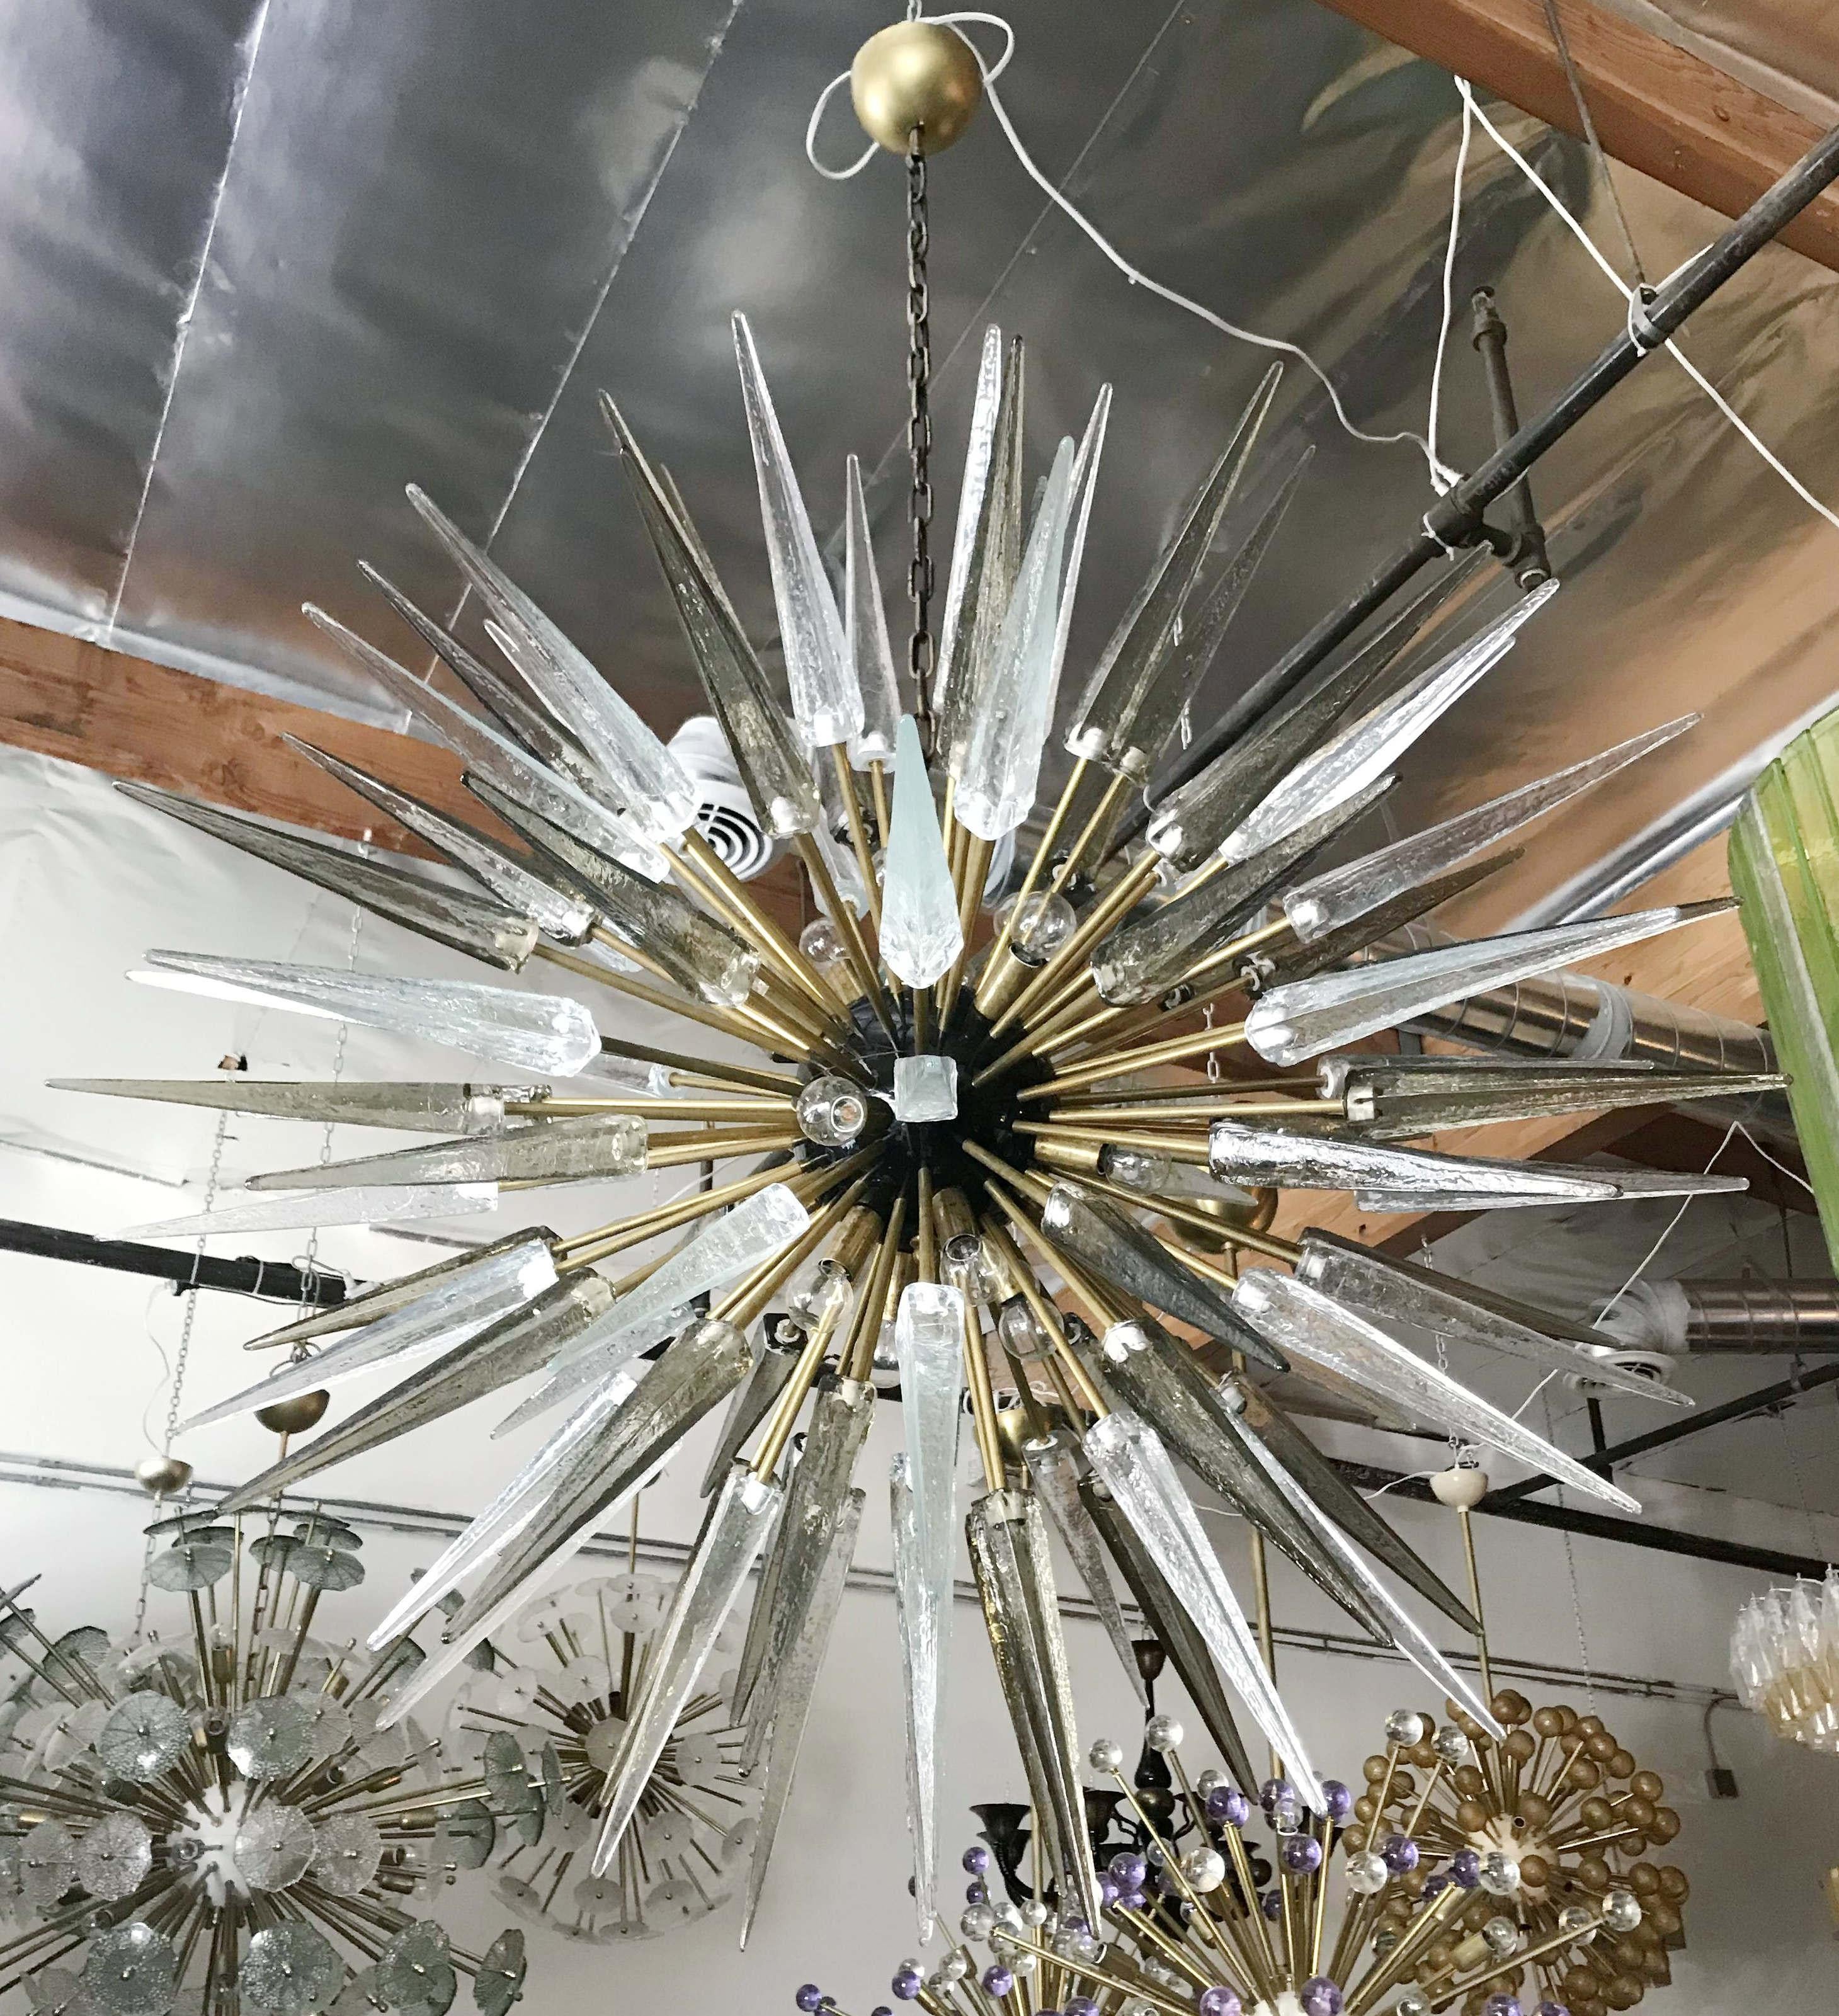 Italian modern Sputnik chandelier with clear and smoky Murano glass shards spikes, mounted on natural unlacquered brass frame with black enameled centre, designed by Fabio Bergomi for Fabio Ltd, made in Italy
16-light / E12 or E14 type / max 40W